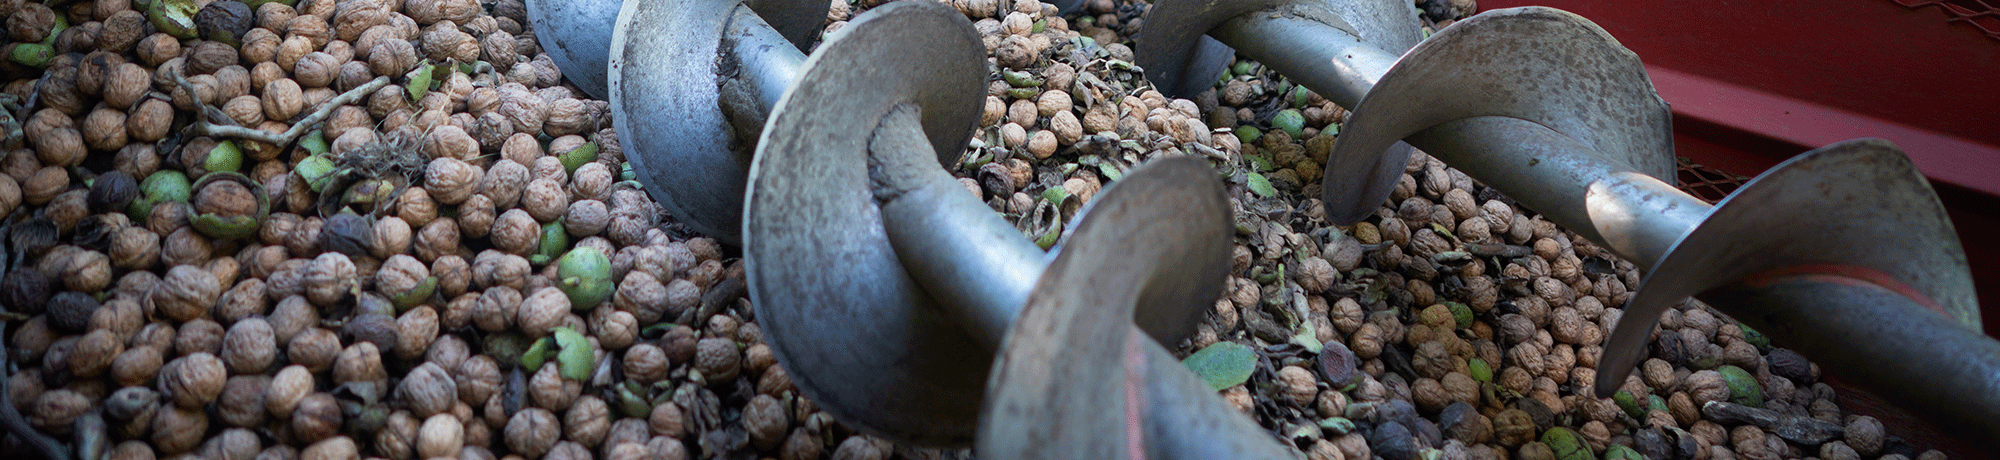 Walnuts being processed.